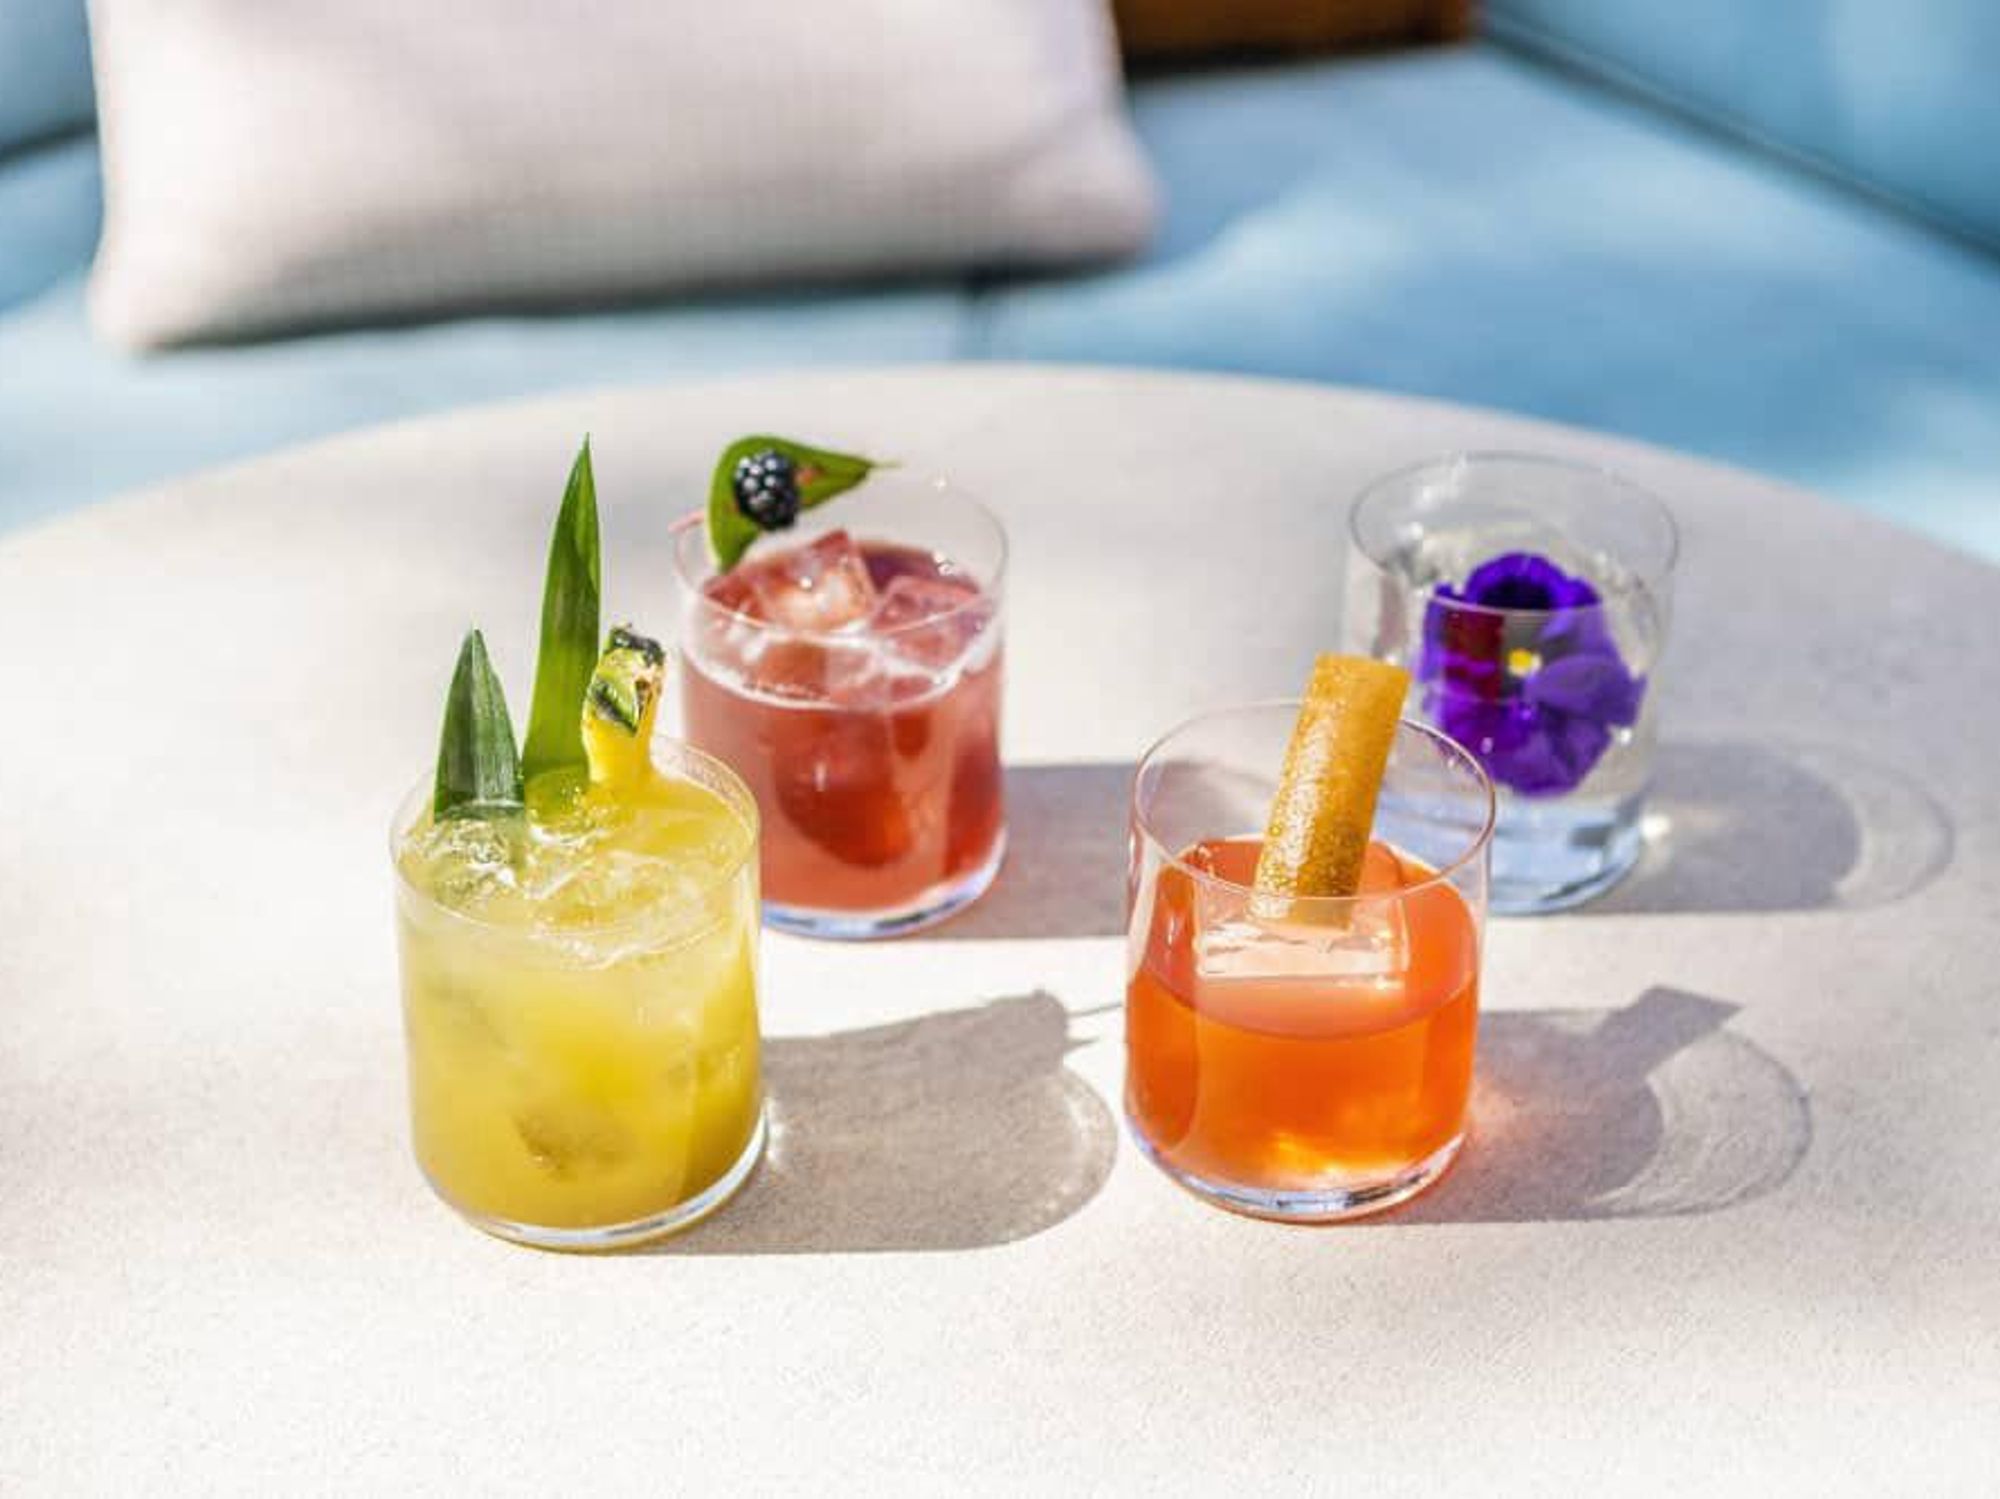 The poolside bar's menu will feature refreshing cocktails, perfect for a Texas afternoon.